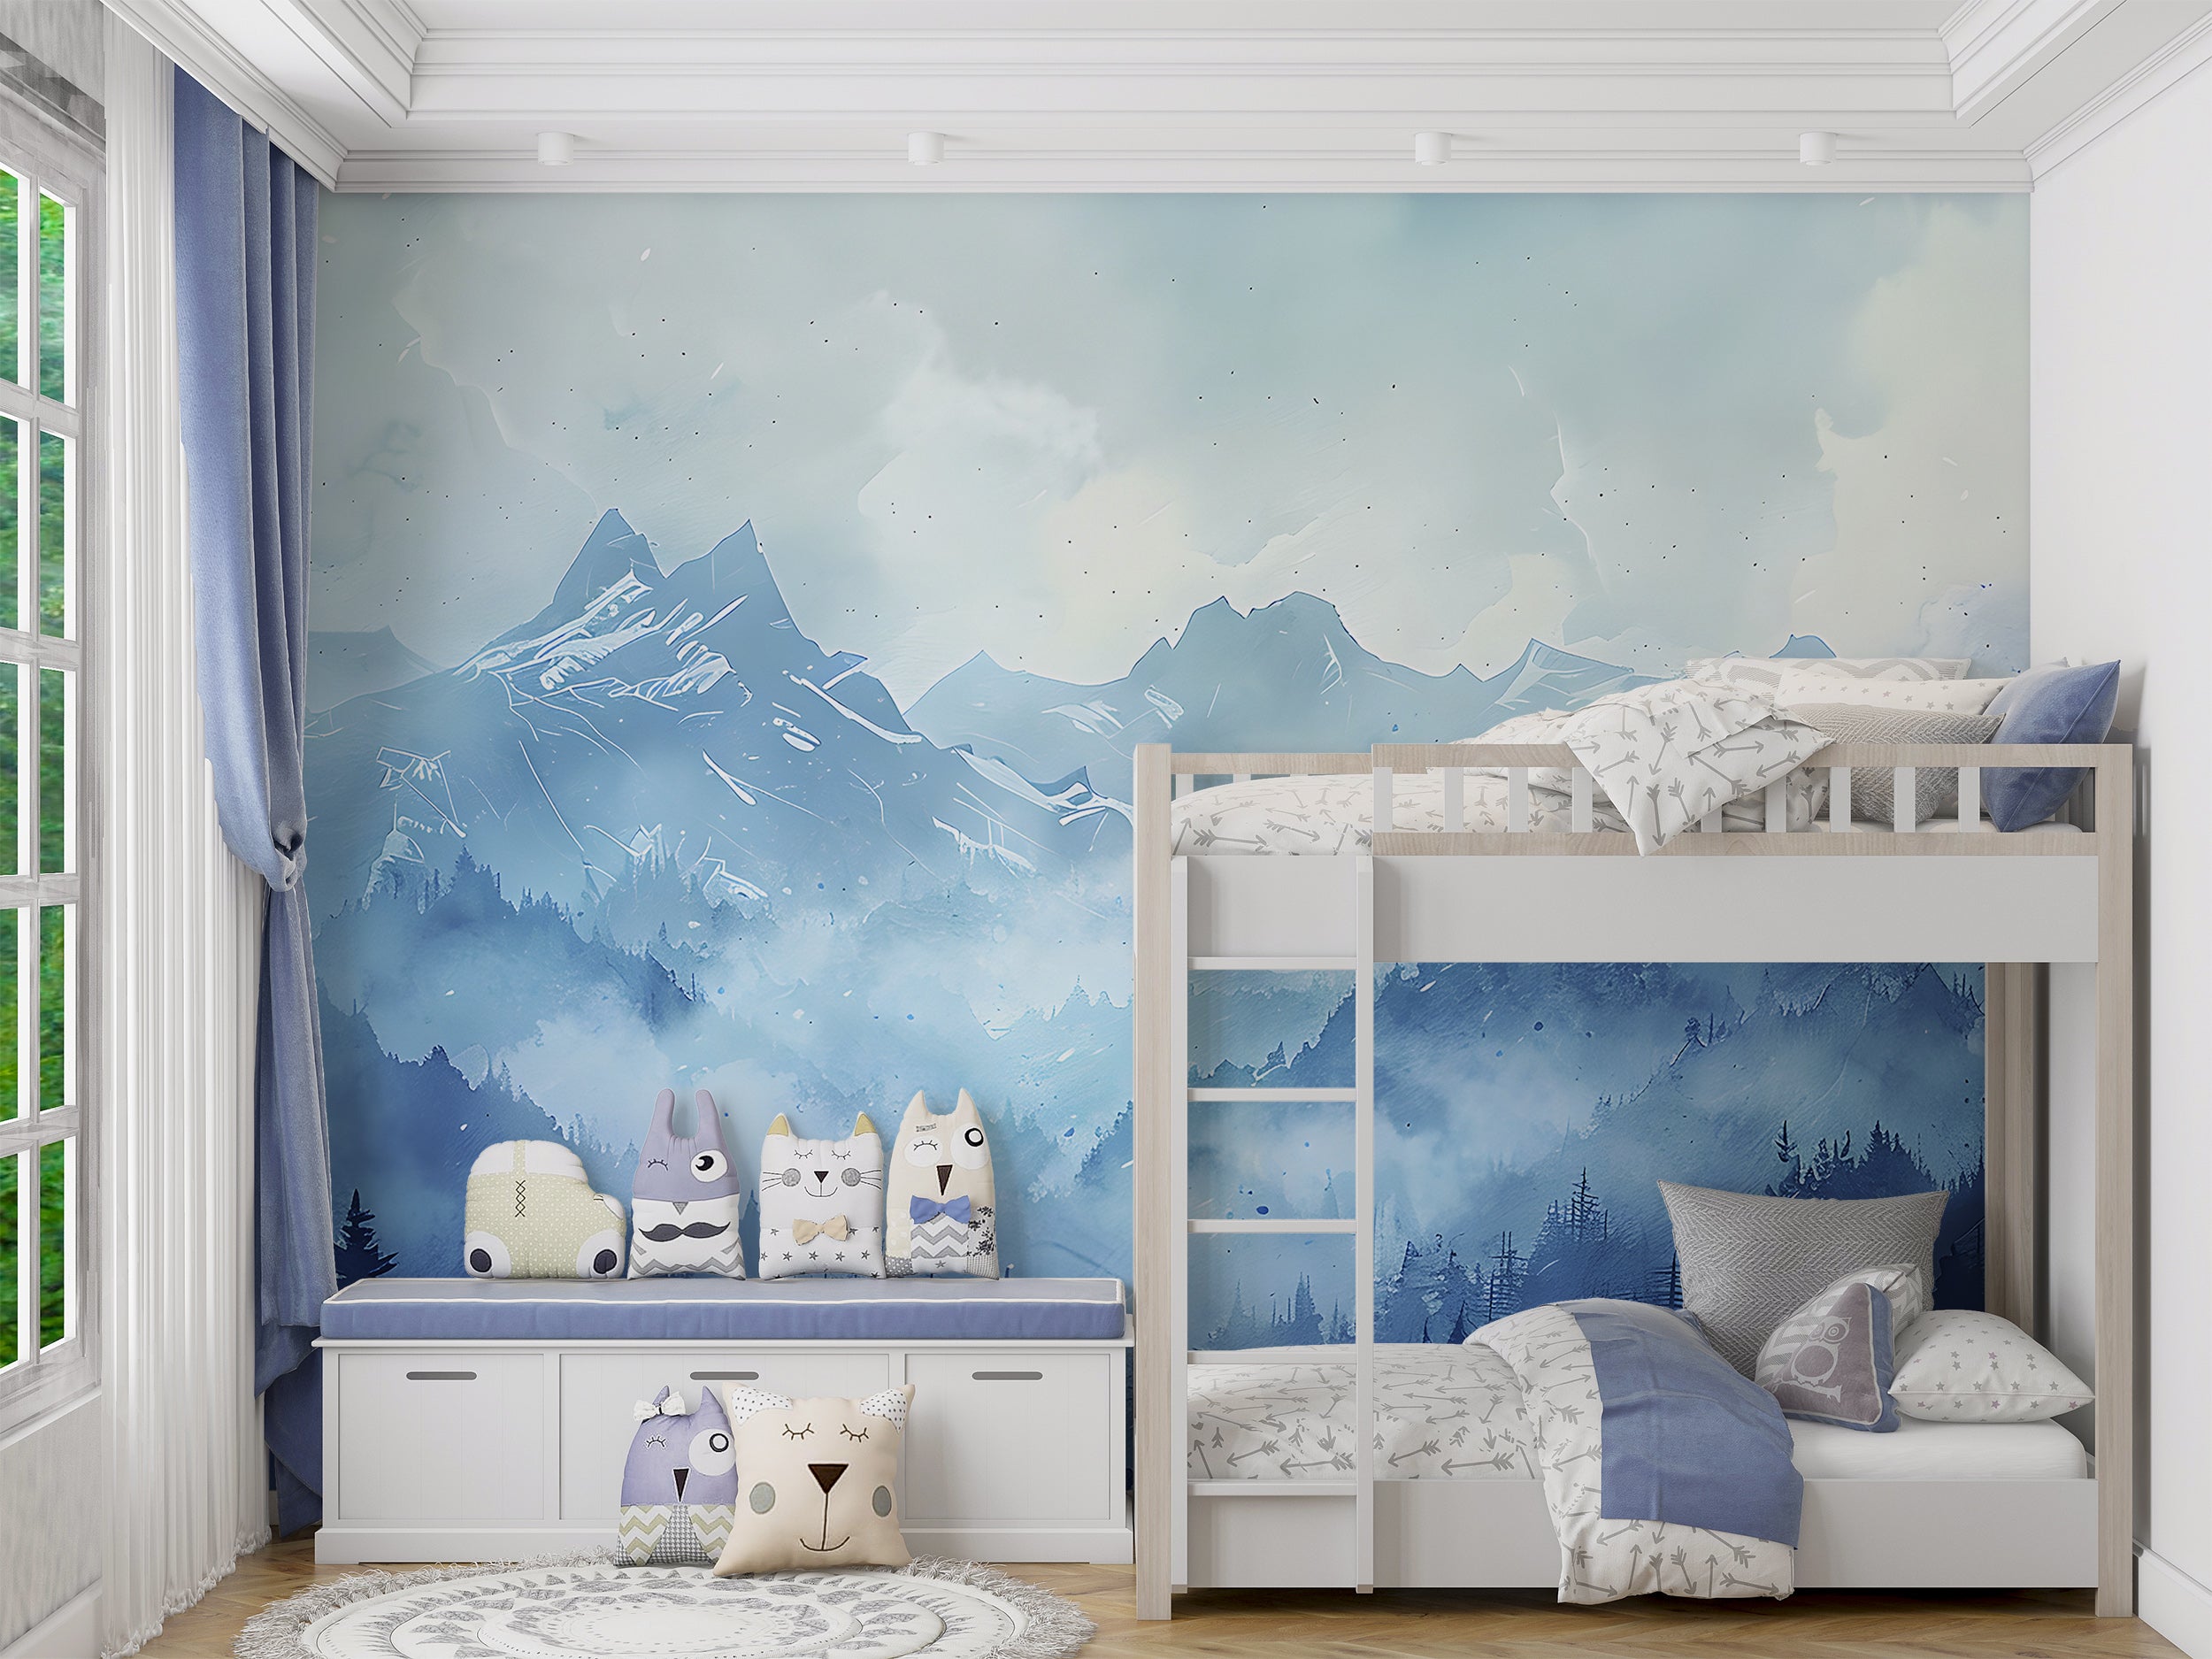 Watercolor Blue Mountains Mural, Self-adhesive Foggy Forest Landscape Wallpaper, Soft Blue Cloudy Mountain Nursery Custom Size Decor